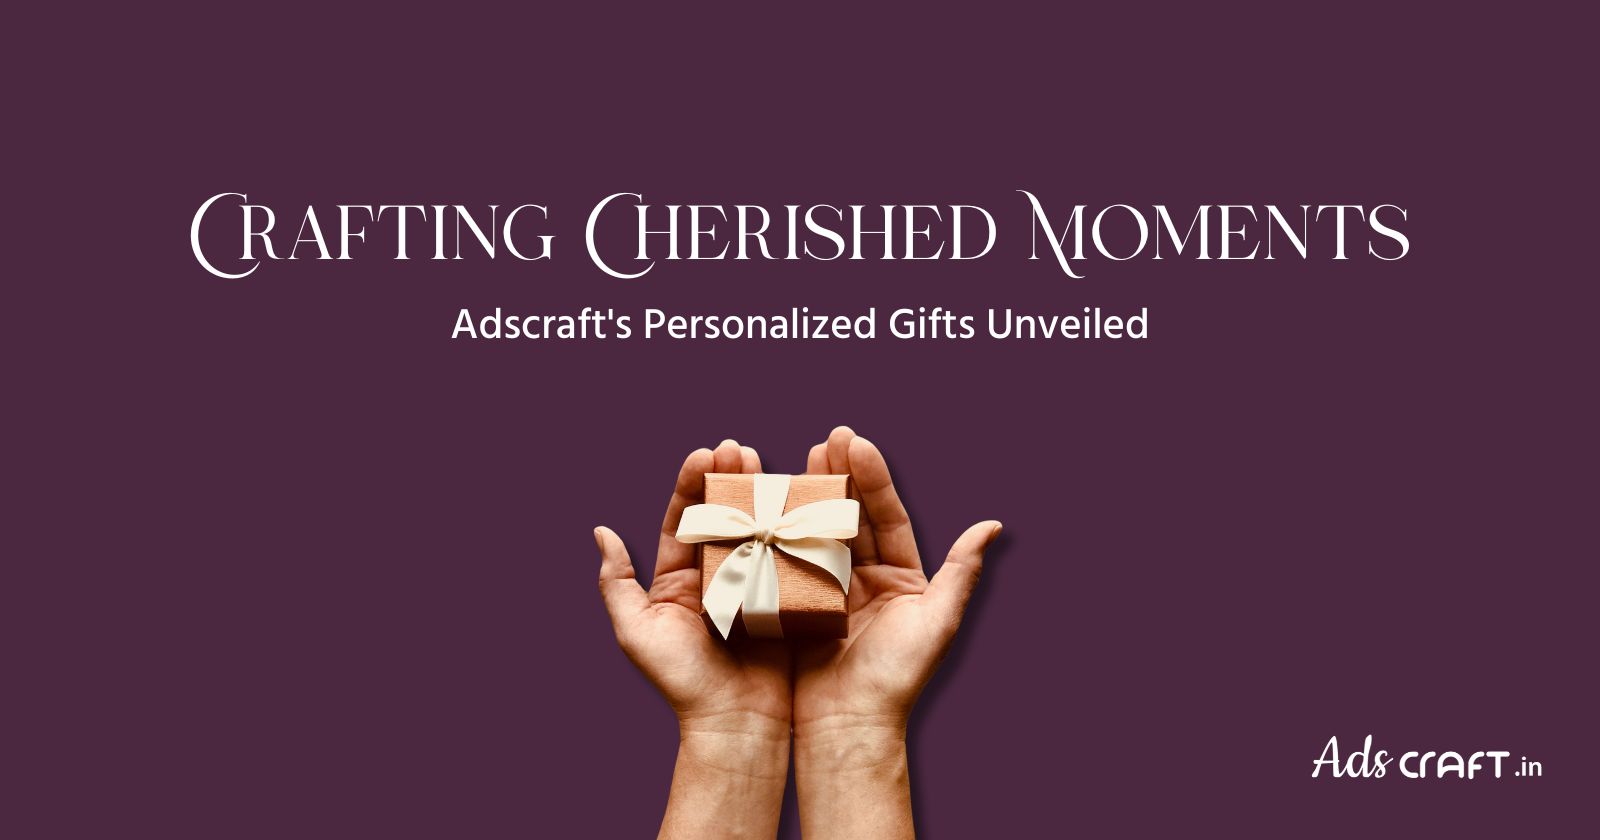 personalized gifts